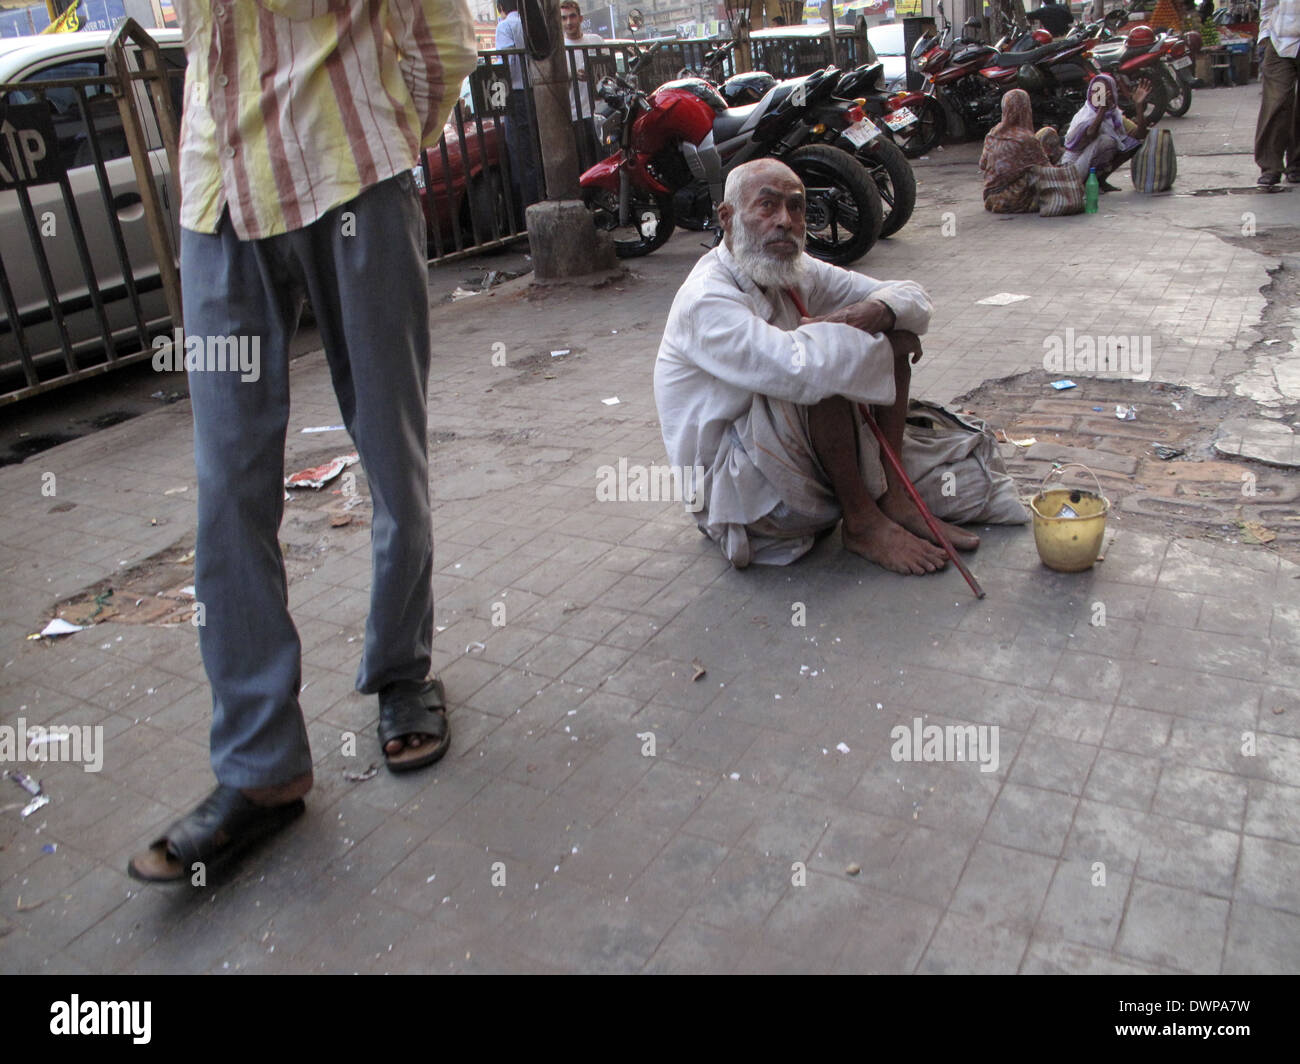 Streets of Kolkata. Thousands of beggars are the most disadvantaged castes living in the streets, January 29, 2009. Stock Photo